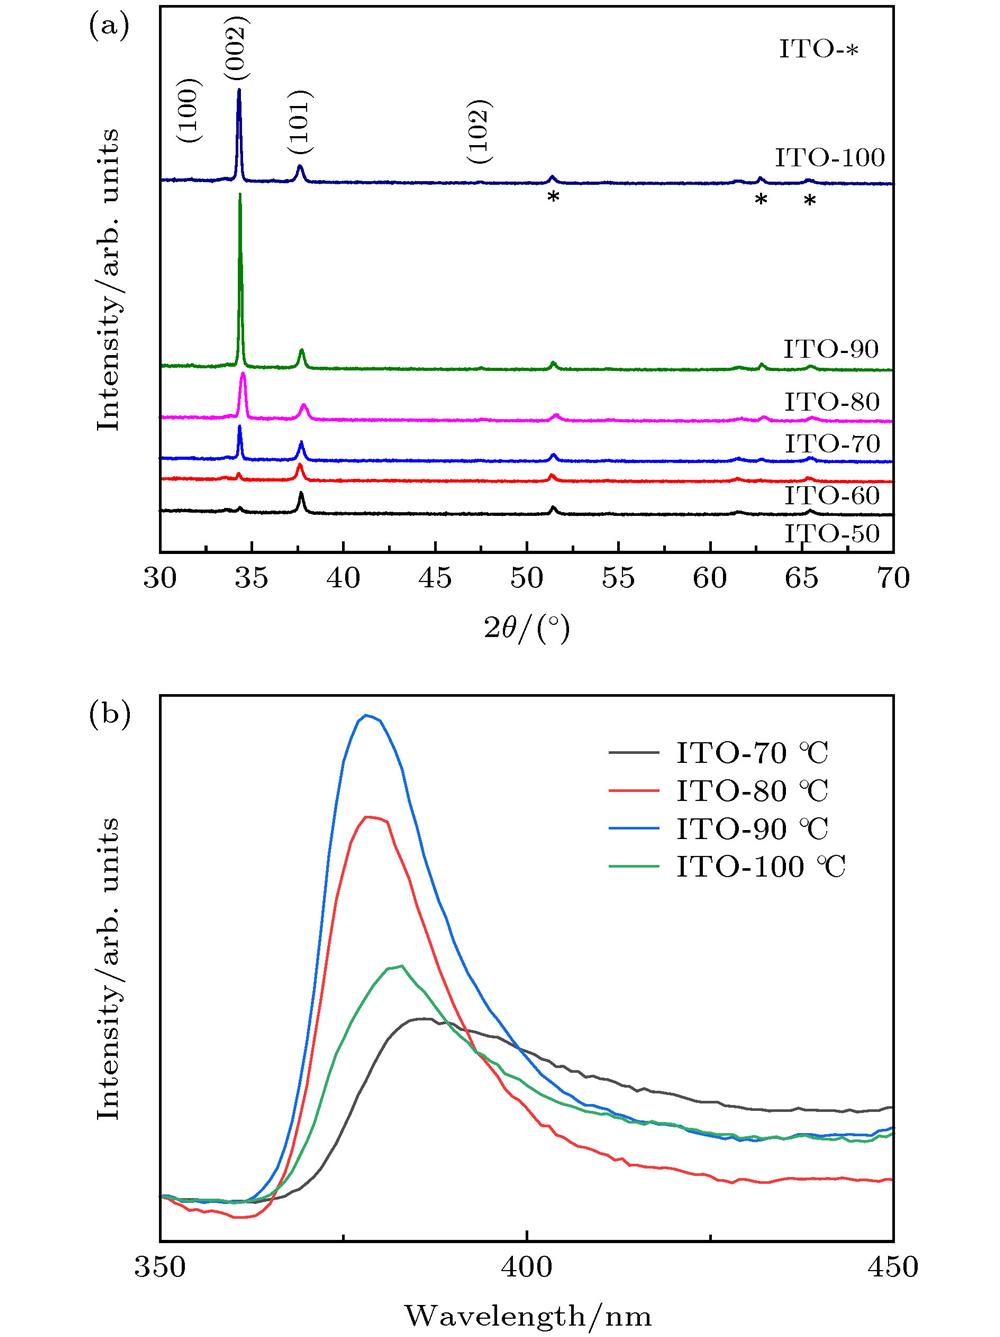 Characterization of (a) XRD spectrum and (b) steady-state PE spectrum of ZnO nanorods growing at different water thermal temperatures.